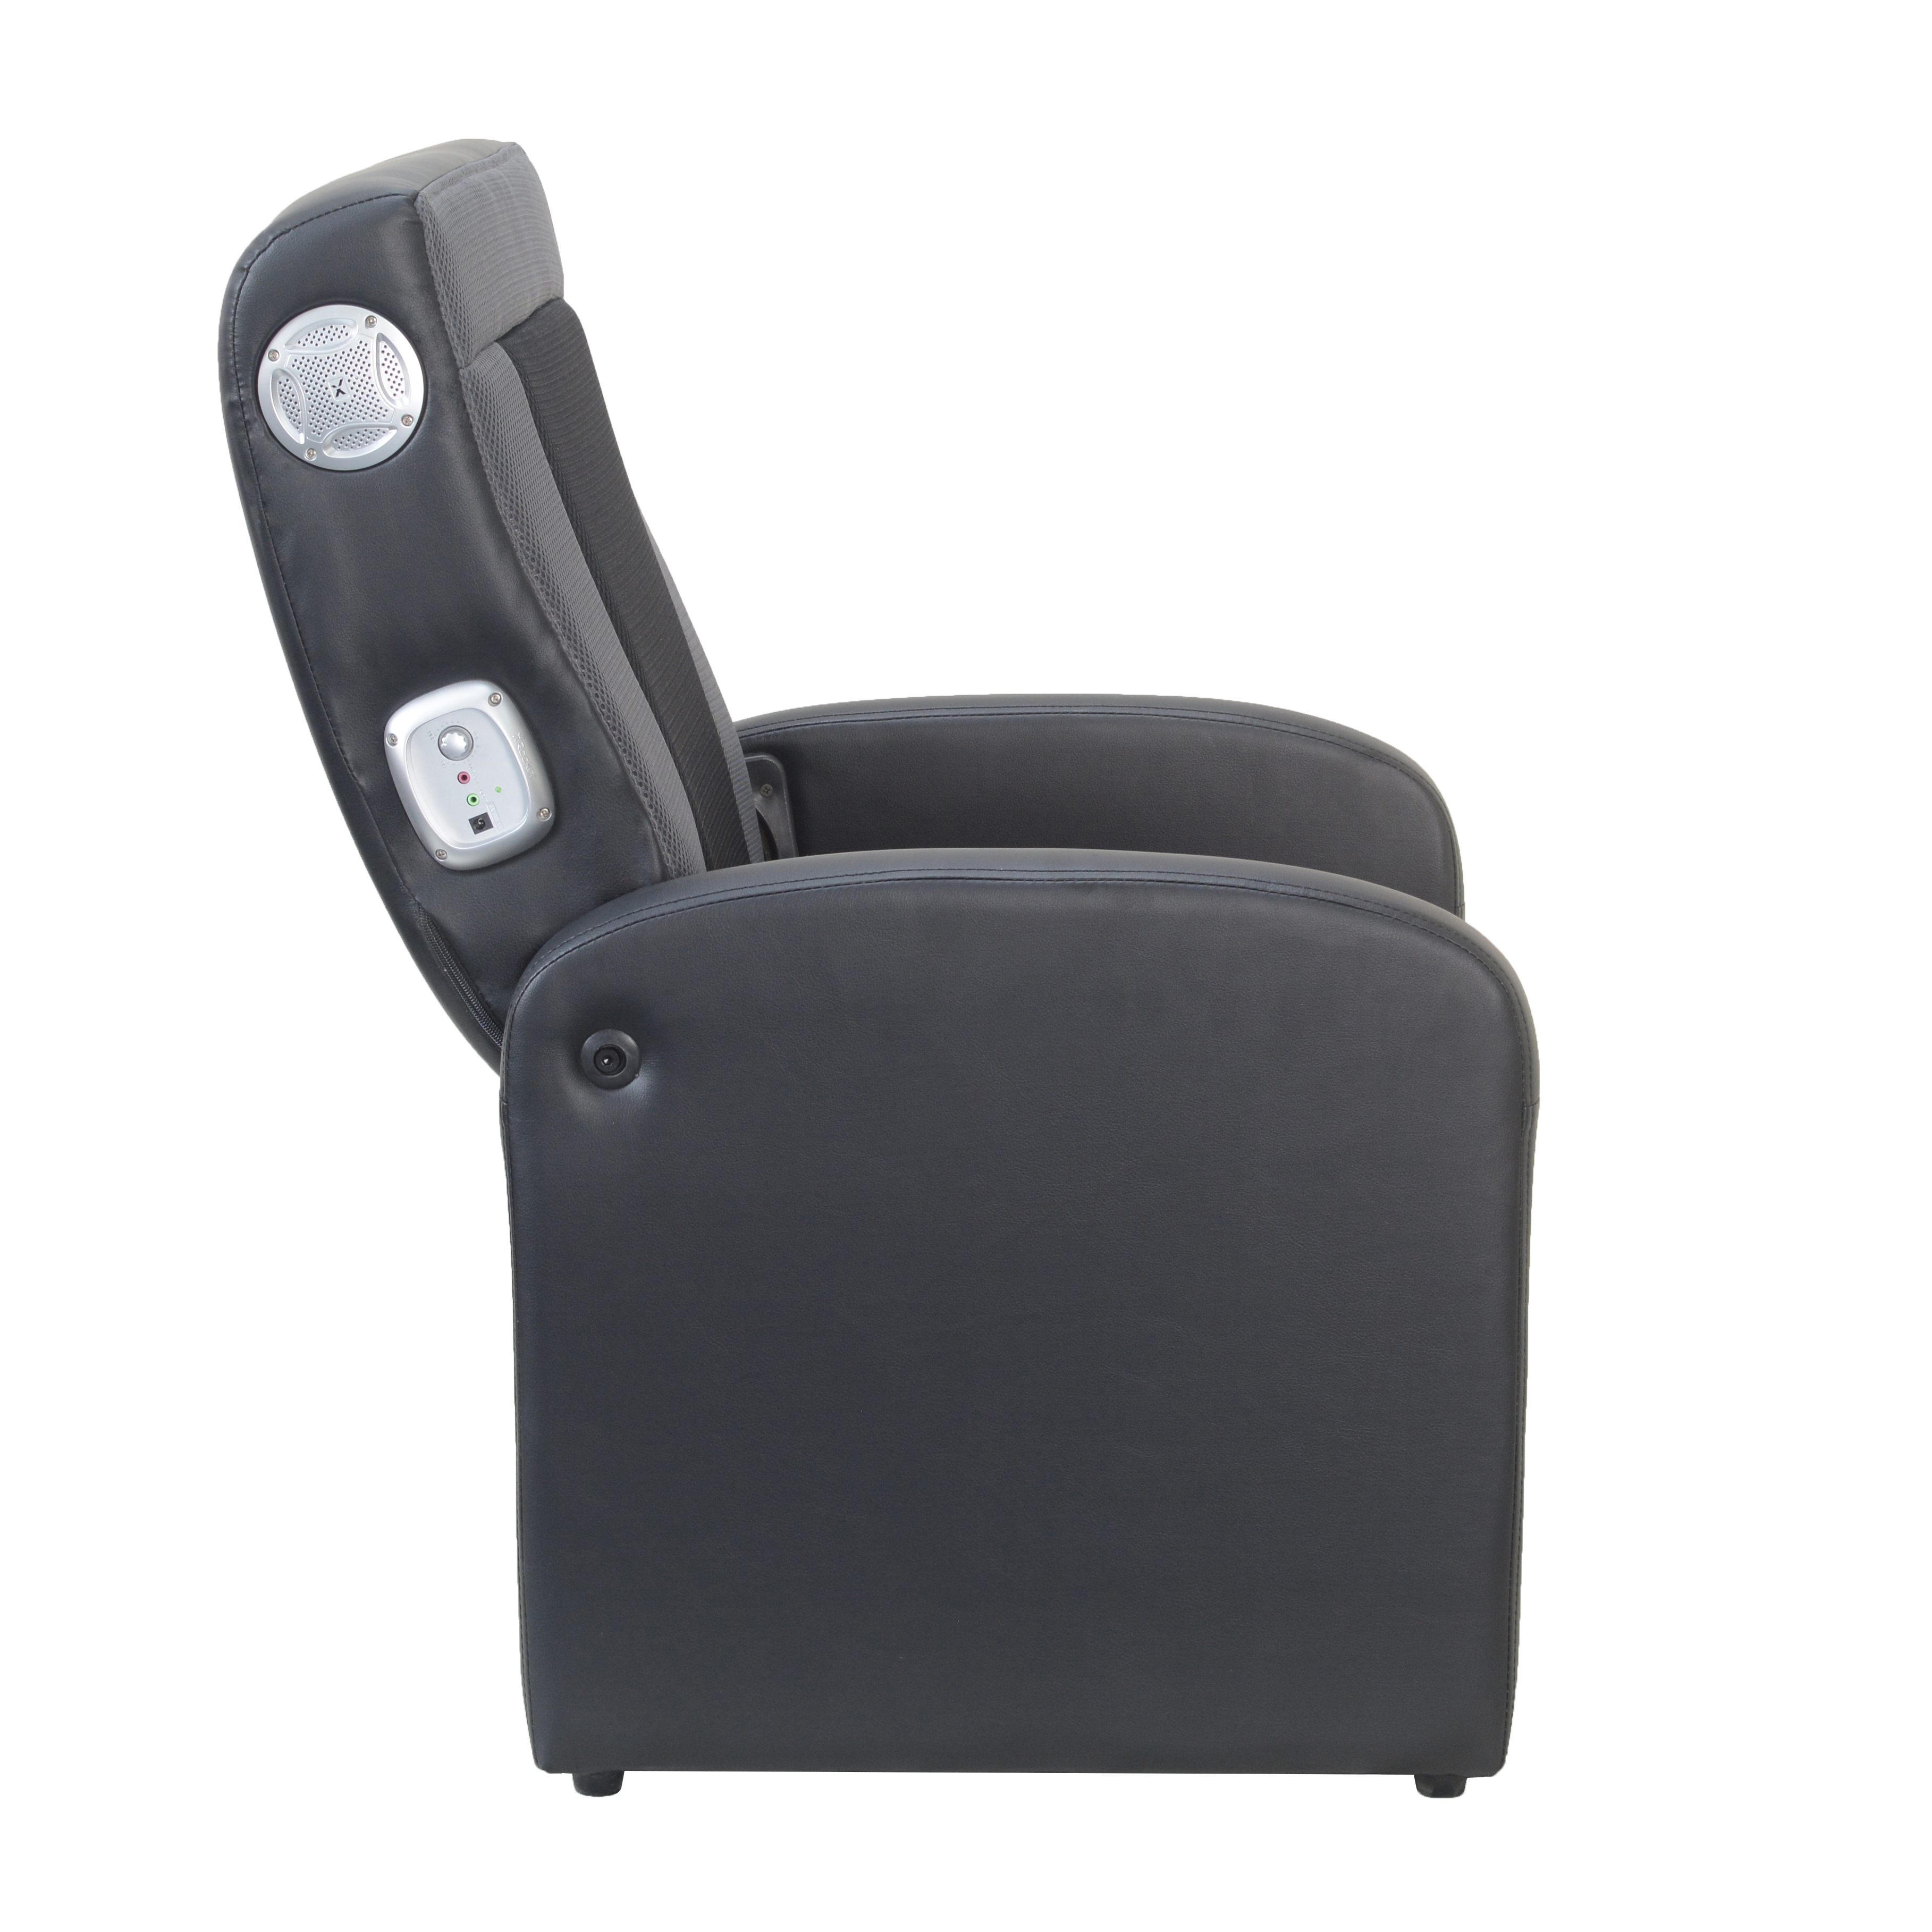 X Rocker 2.0 Flip Gaming Chair with Storage | Child and Teen | Black/Gray | 25.59 x 26.77 x 35.04 inches - image 2 of 6